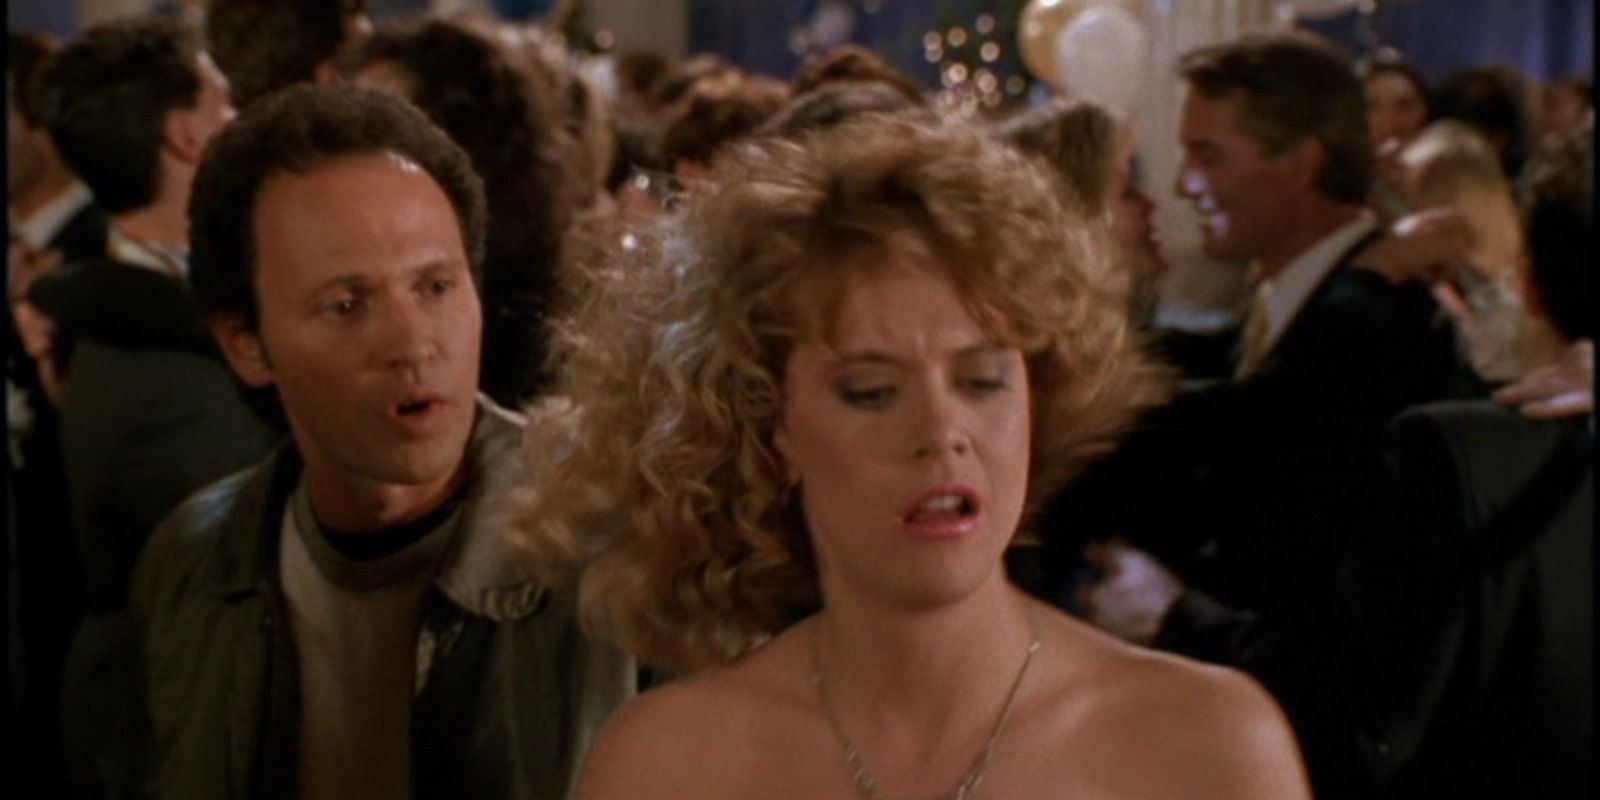 Harry goes to Sally at a NYE party and confesses his love in When Harry Met Sally.